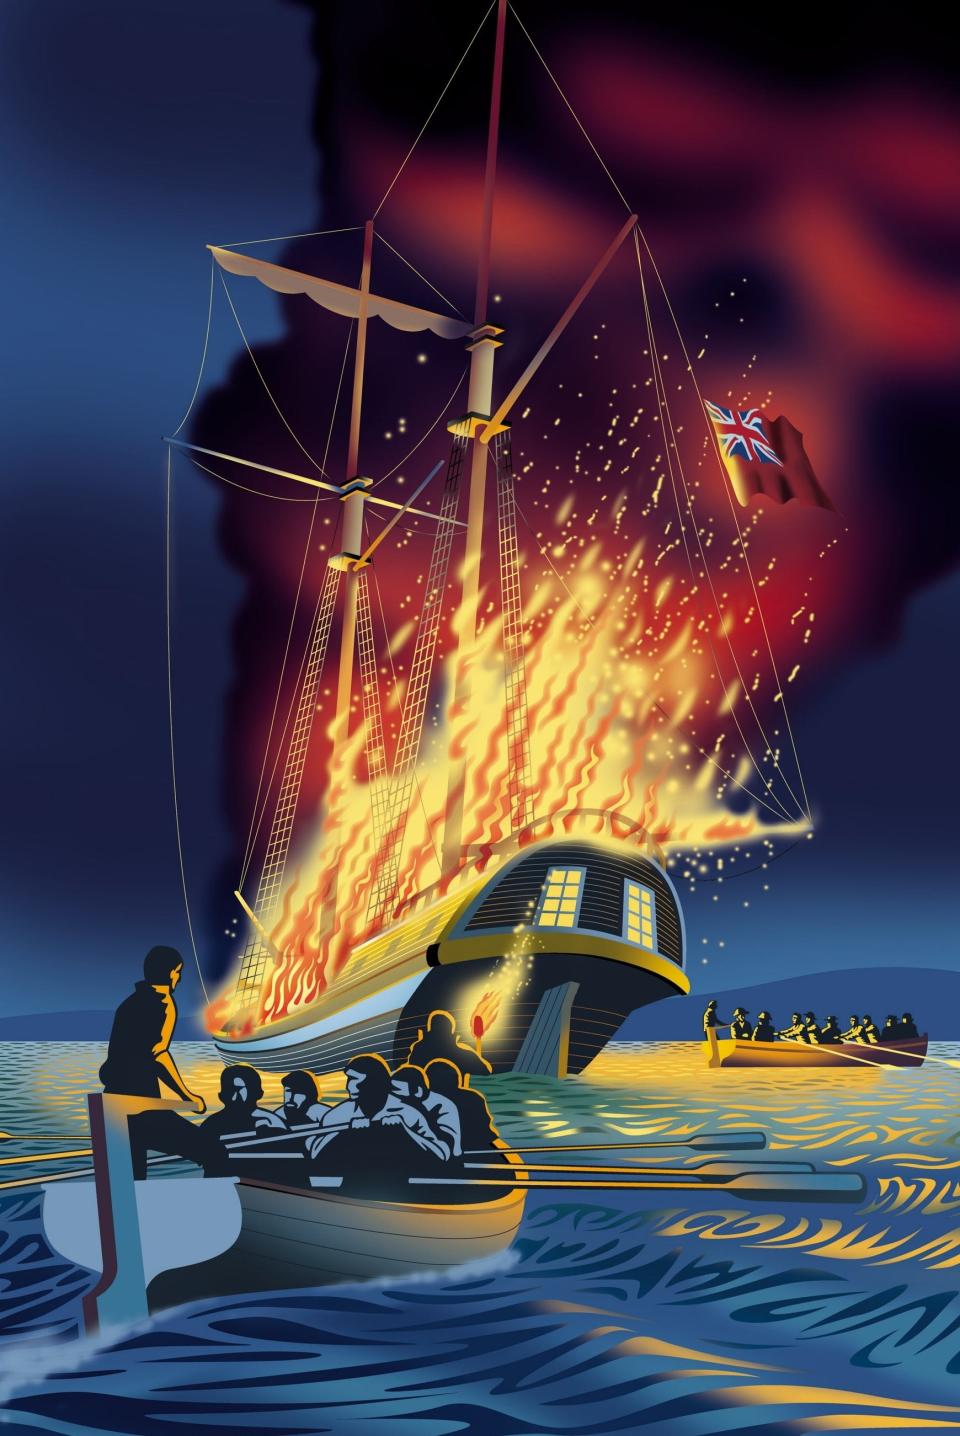 A depiction of the sinking of the Gaspee in Narragansett Bay, a militant act of rebellion that predated the Boston Tea Party and the Battles of Lexington and Concord.